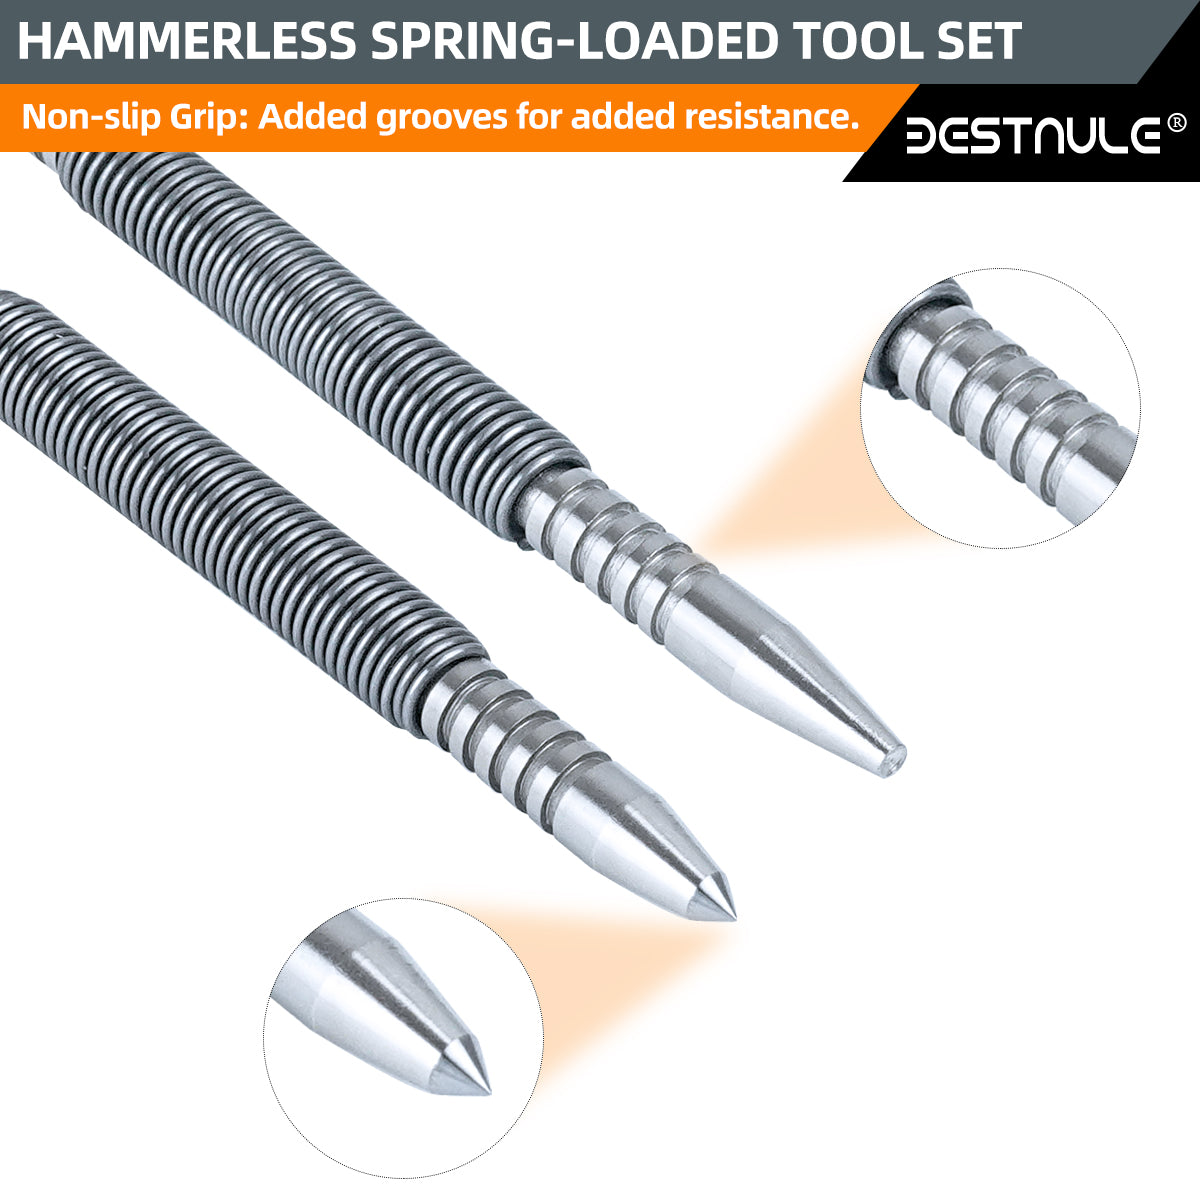 BESTNULE 4-Piece Nail Setter Dual Head Nail Set & Dual Head Center Punch & Hammerless Cold Chisel & Hinge Pin Remover Punch Set, Nail Setter Features 1/8-in, 3/32-in, 3/16-in, 1/16-in, 5/16-in, 1/8-in